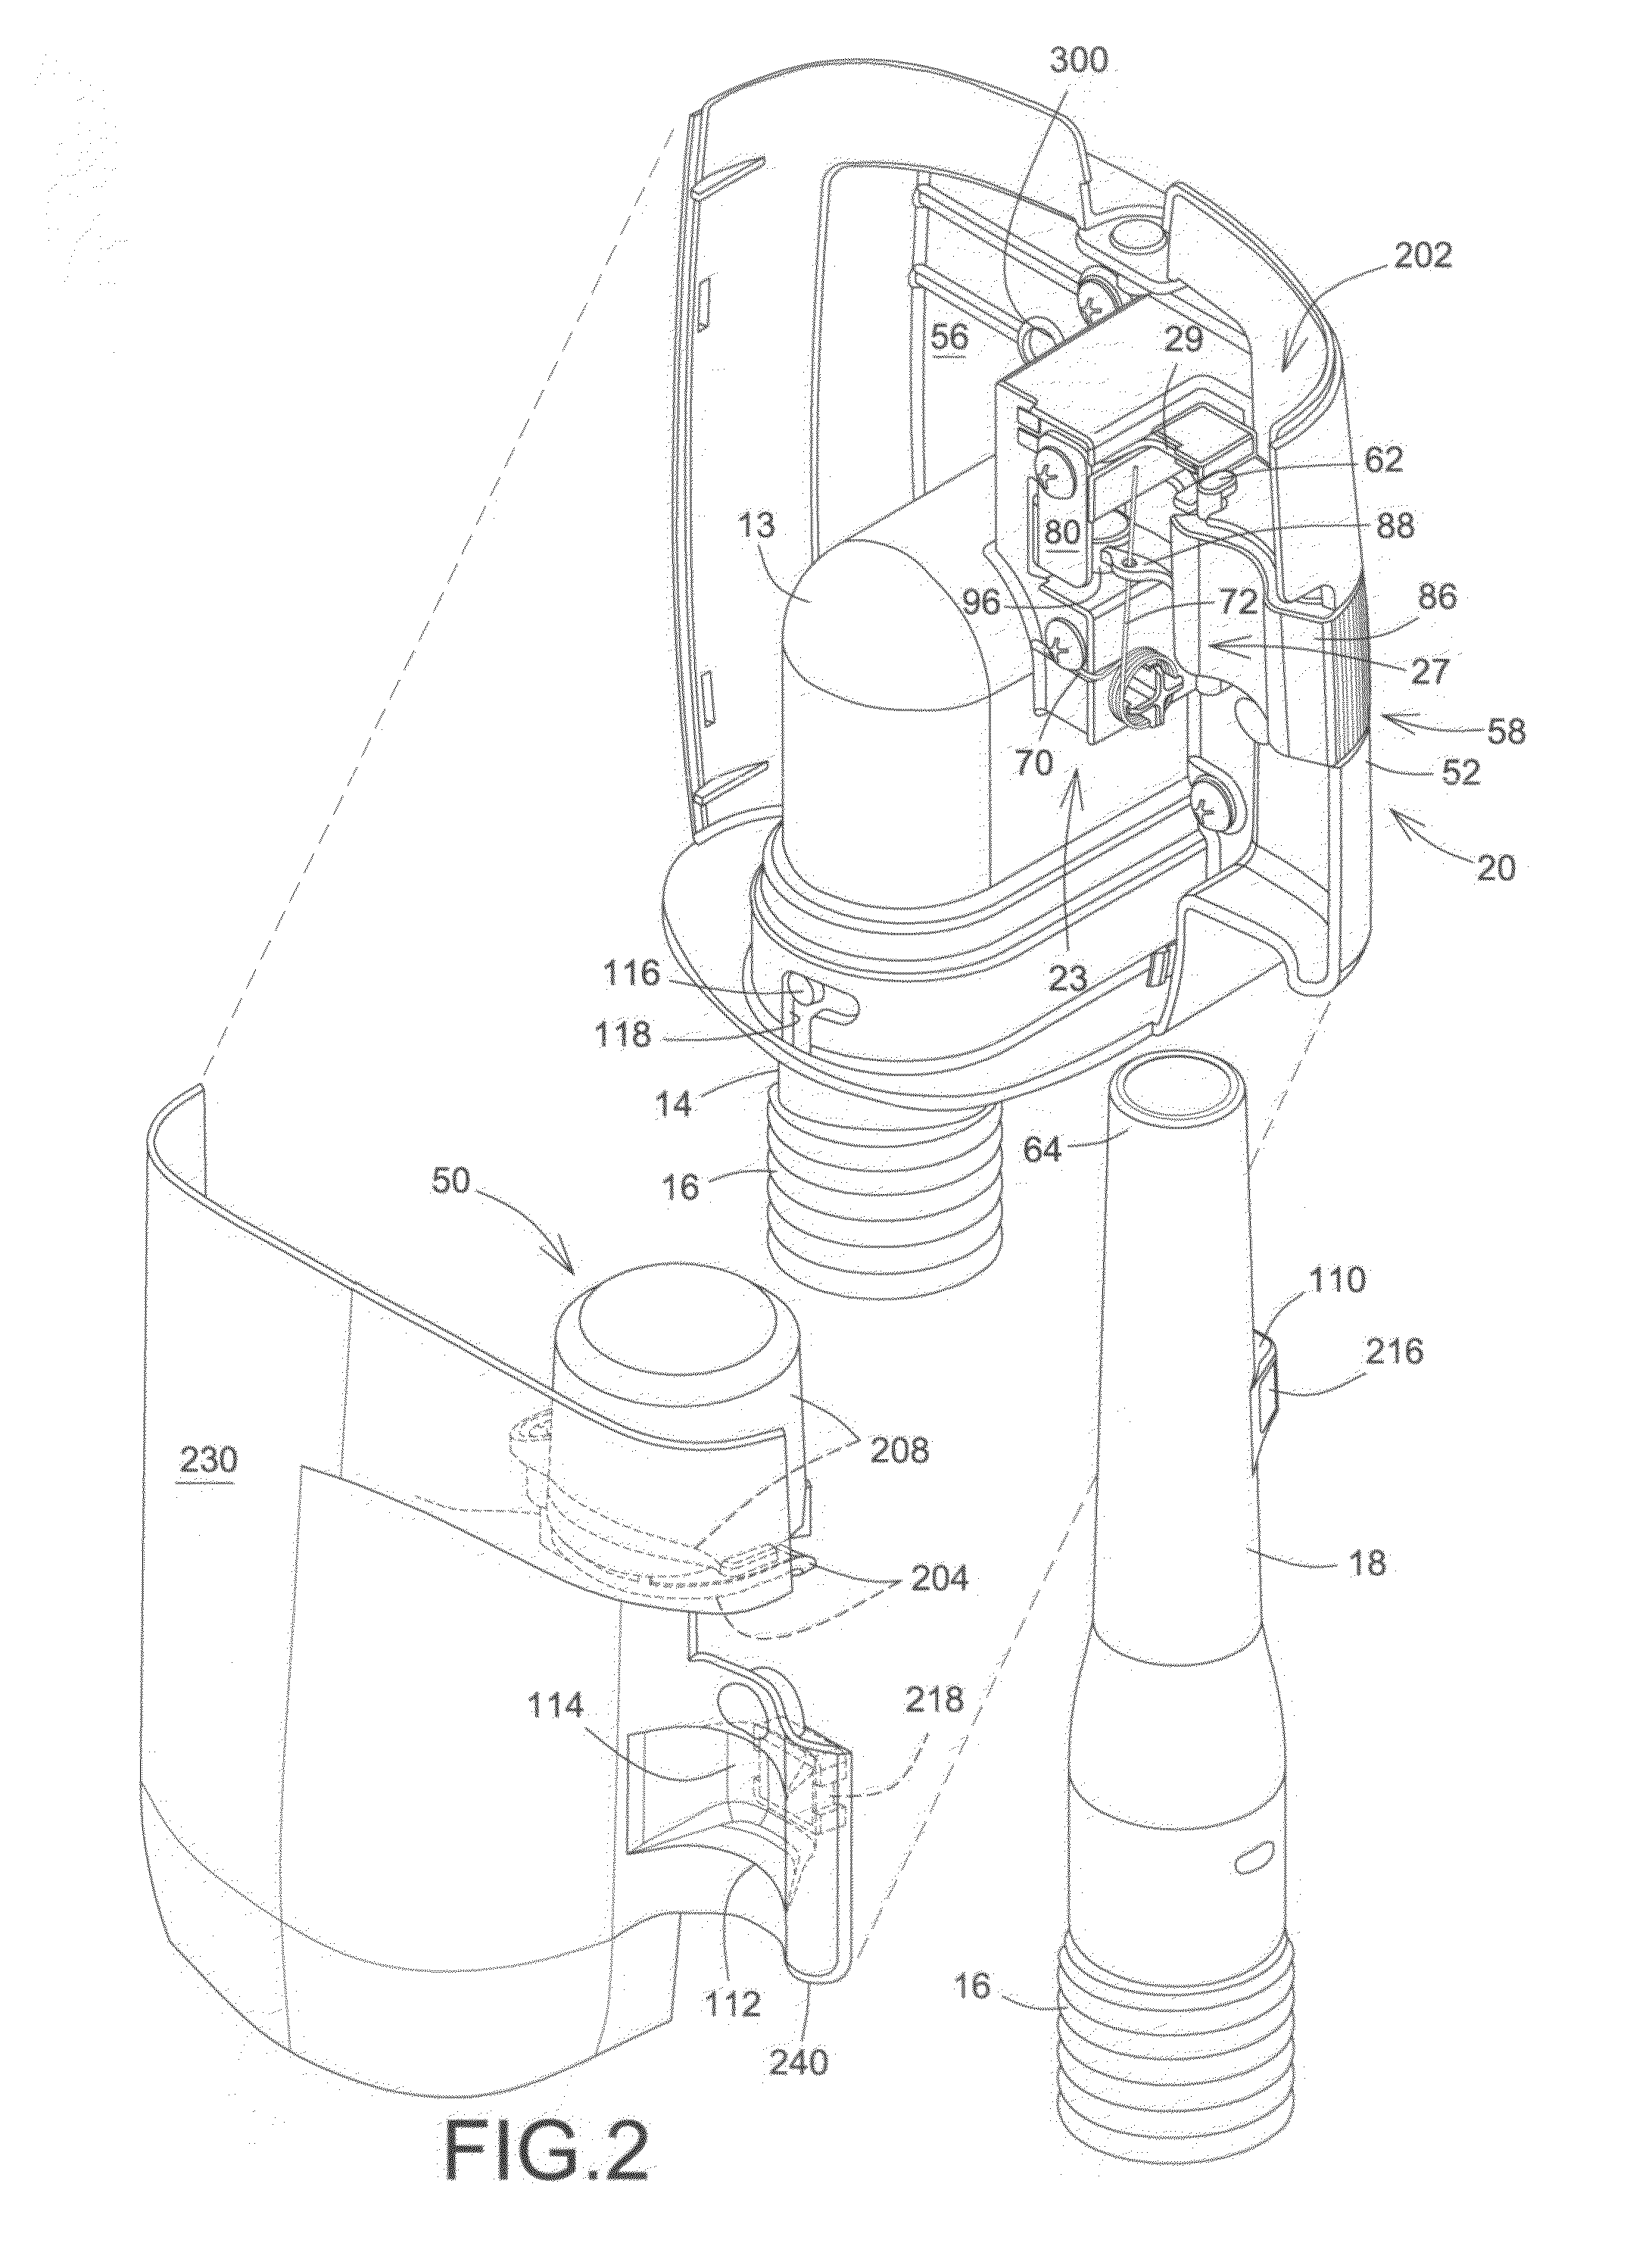 Auxiliary vacuum device for a central vacuum cleaning system